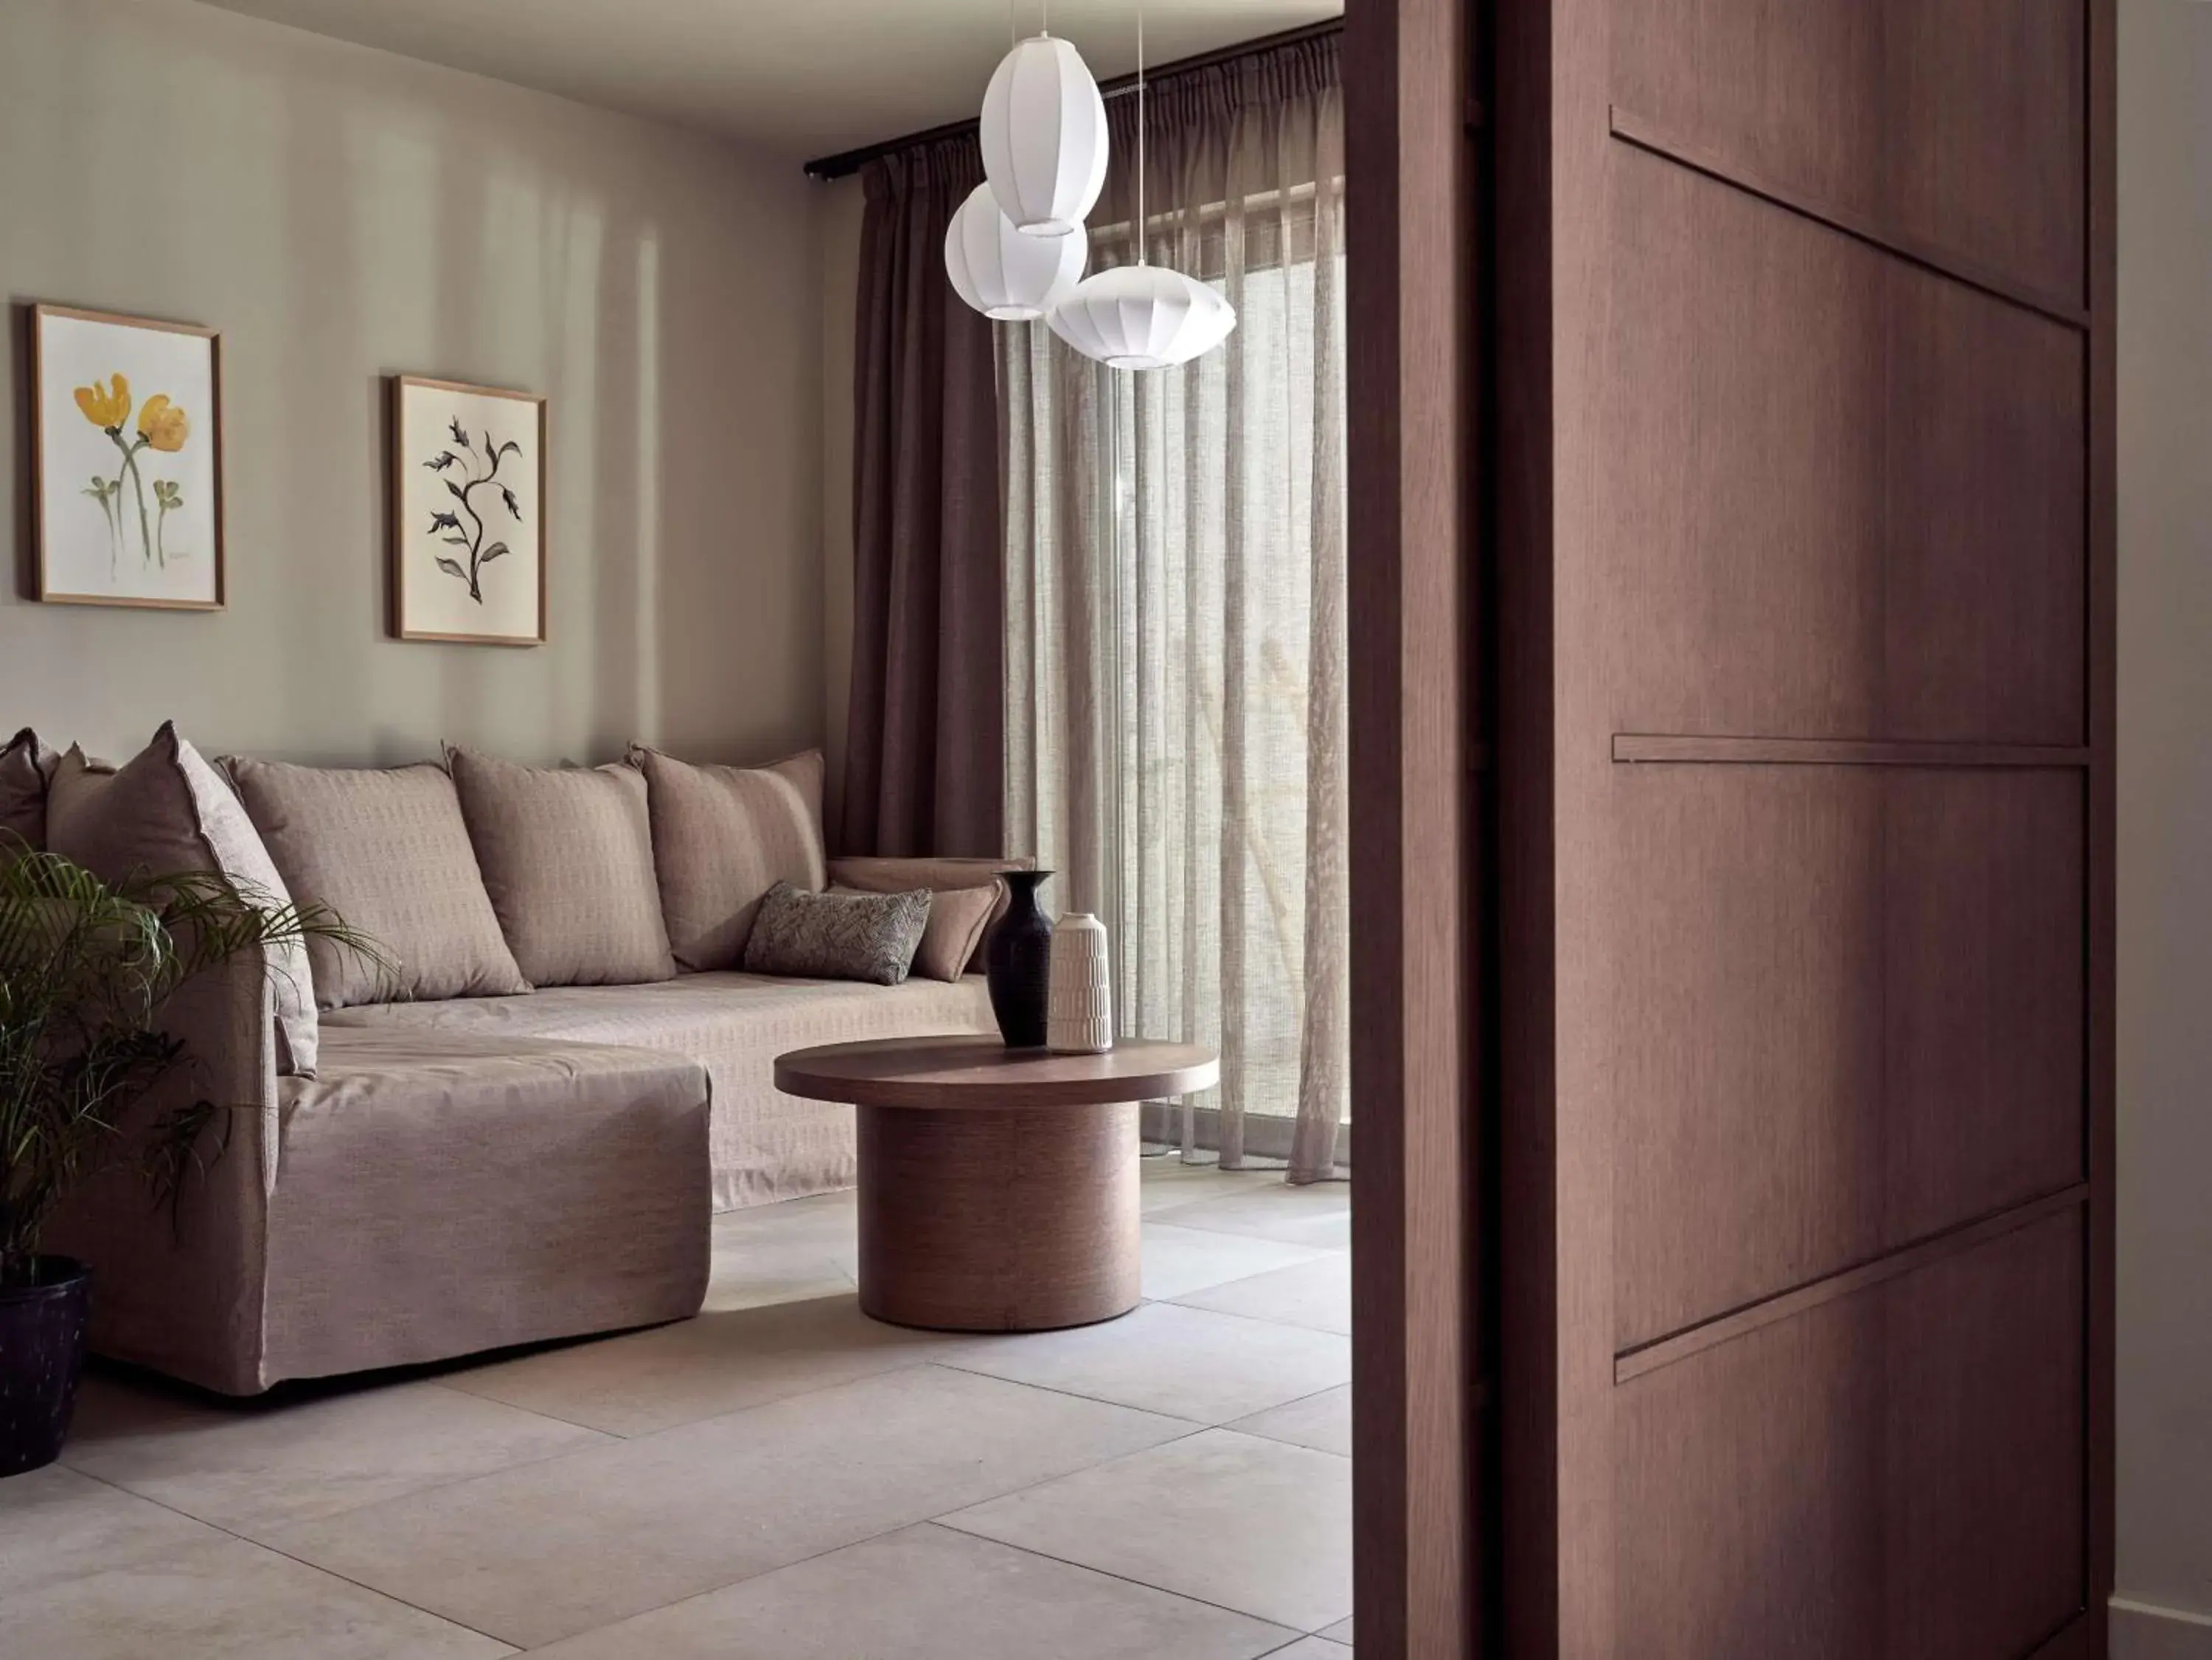 Bedroom, Seating Area in The Royal Senses Resort Crete, Curio Collection by Hilton